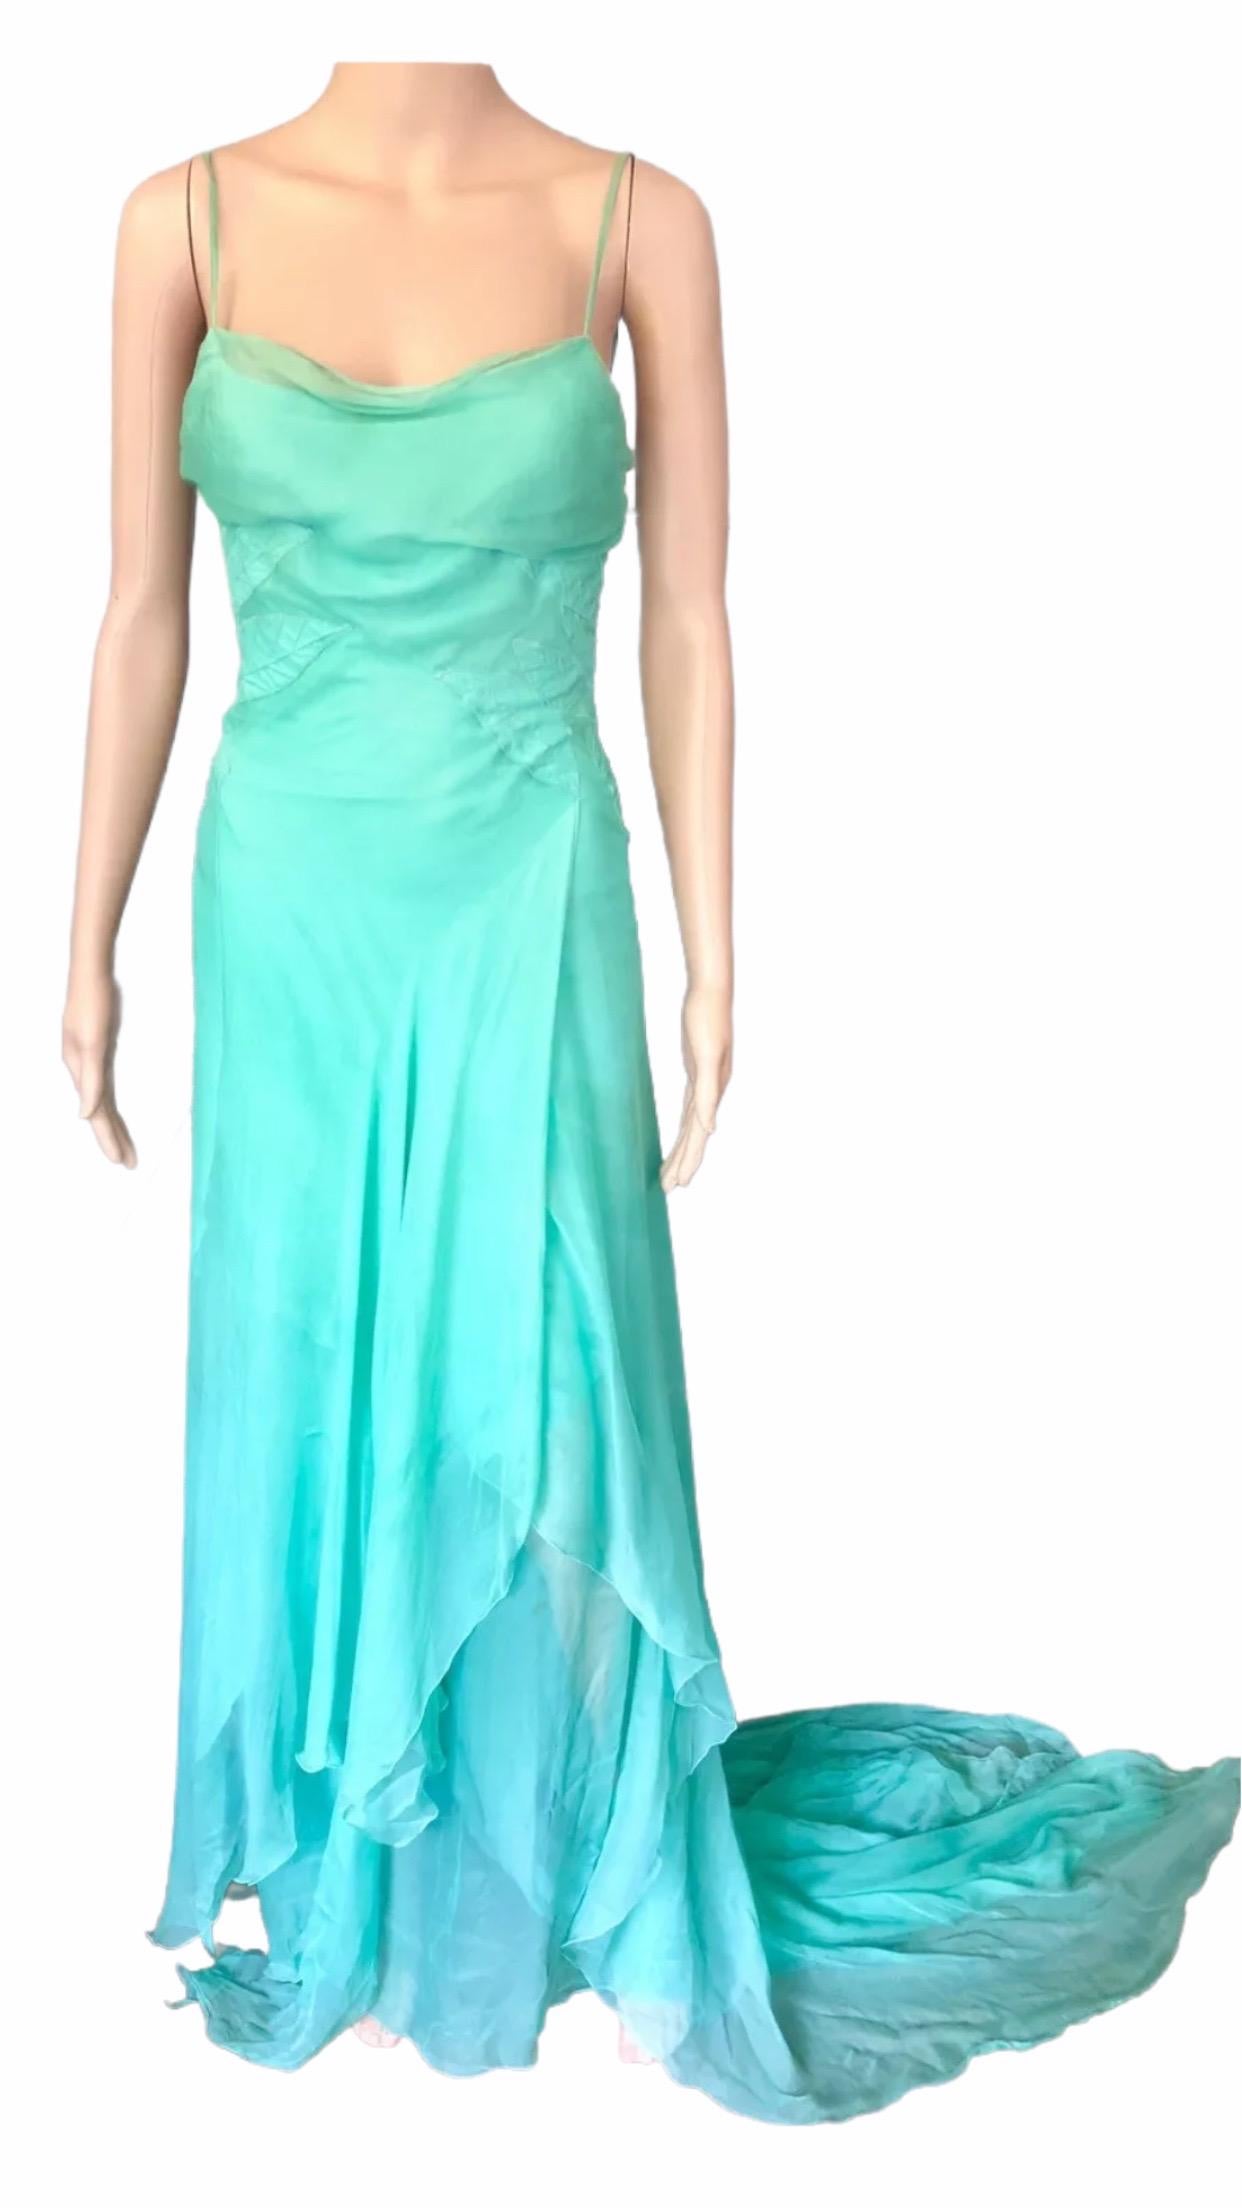 Gianni Versace F/W 1999 Runway Cutout Turquoise Silk Open Back Evening Dress Gown IT 38

As seen on the F/W 1999 Runway.


